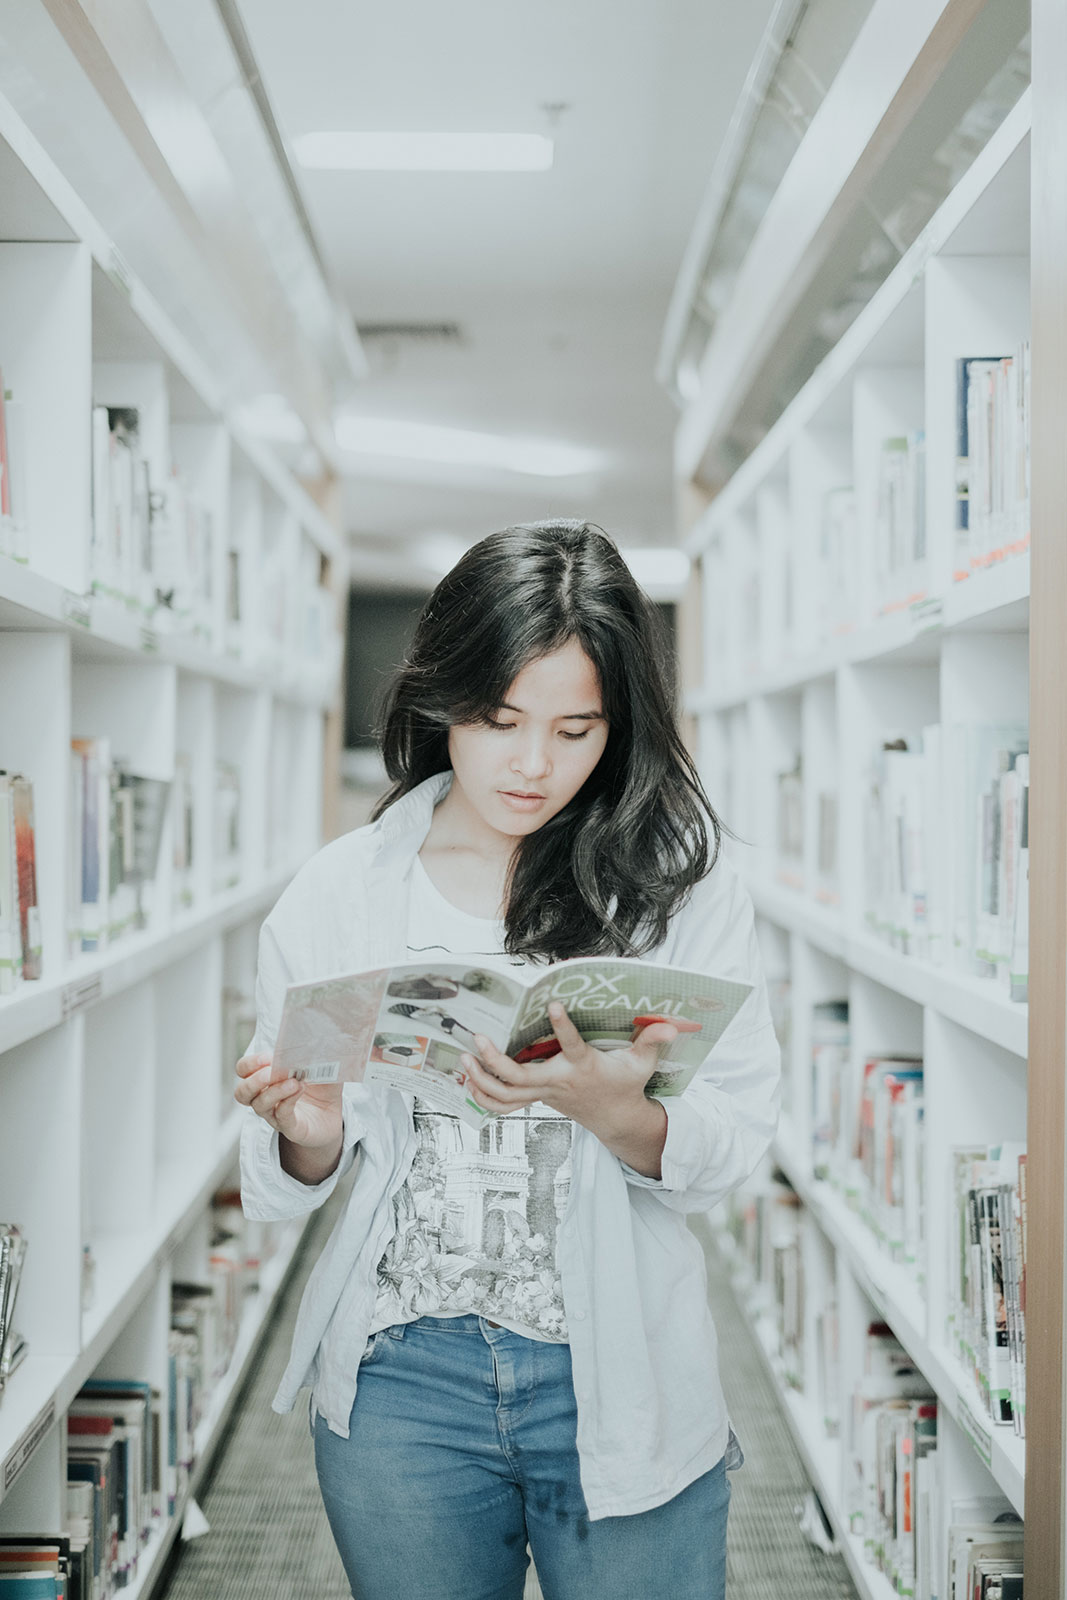 Female student in library reading a book